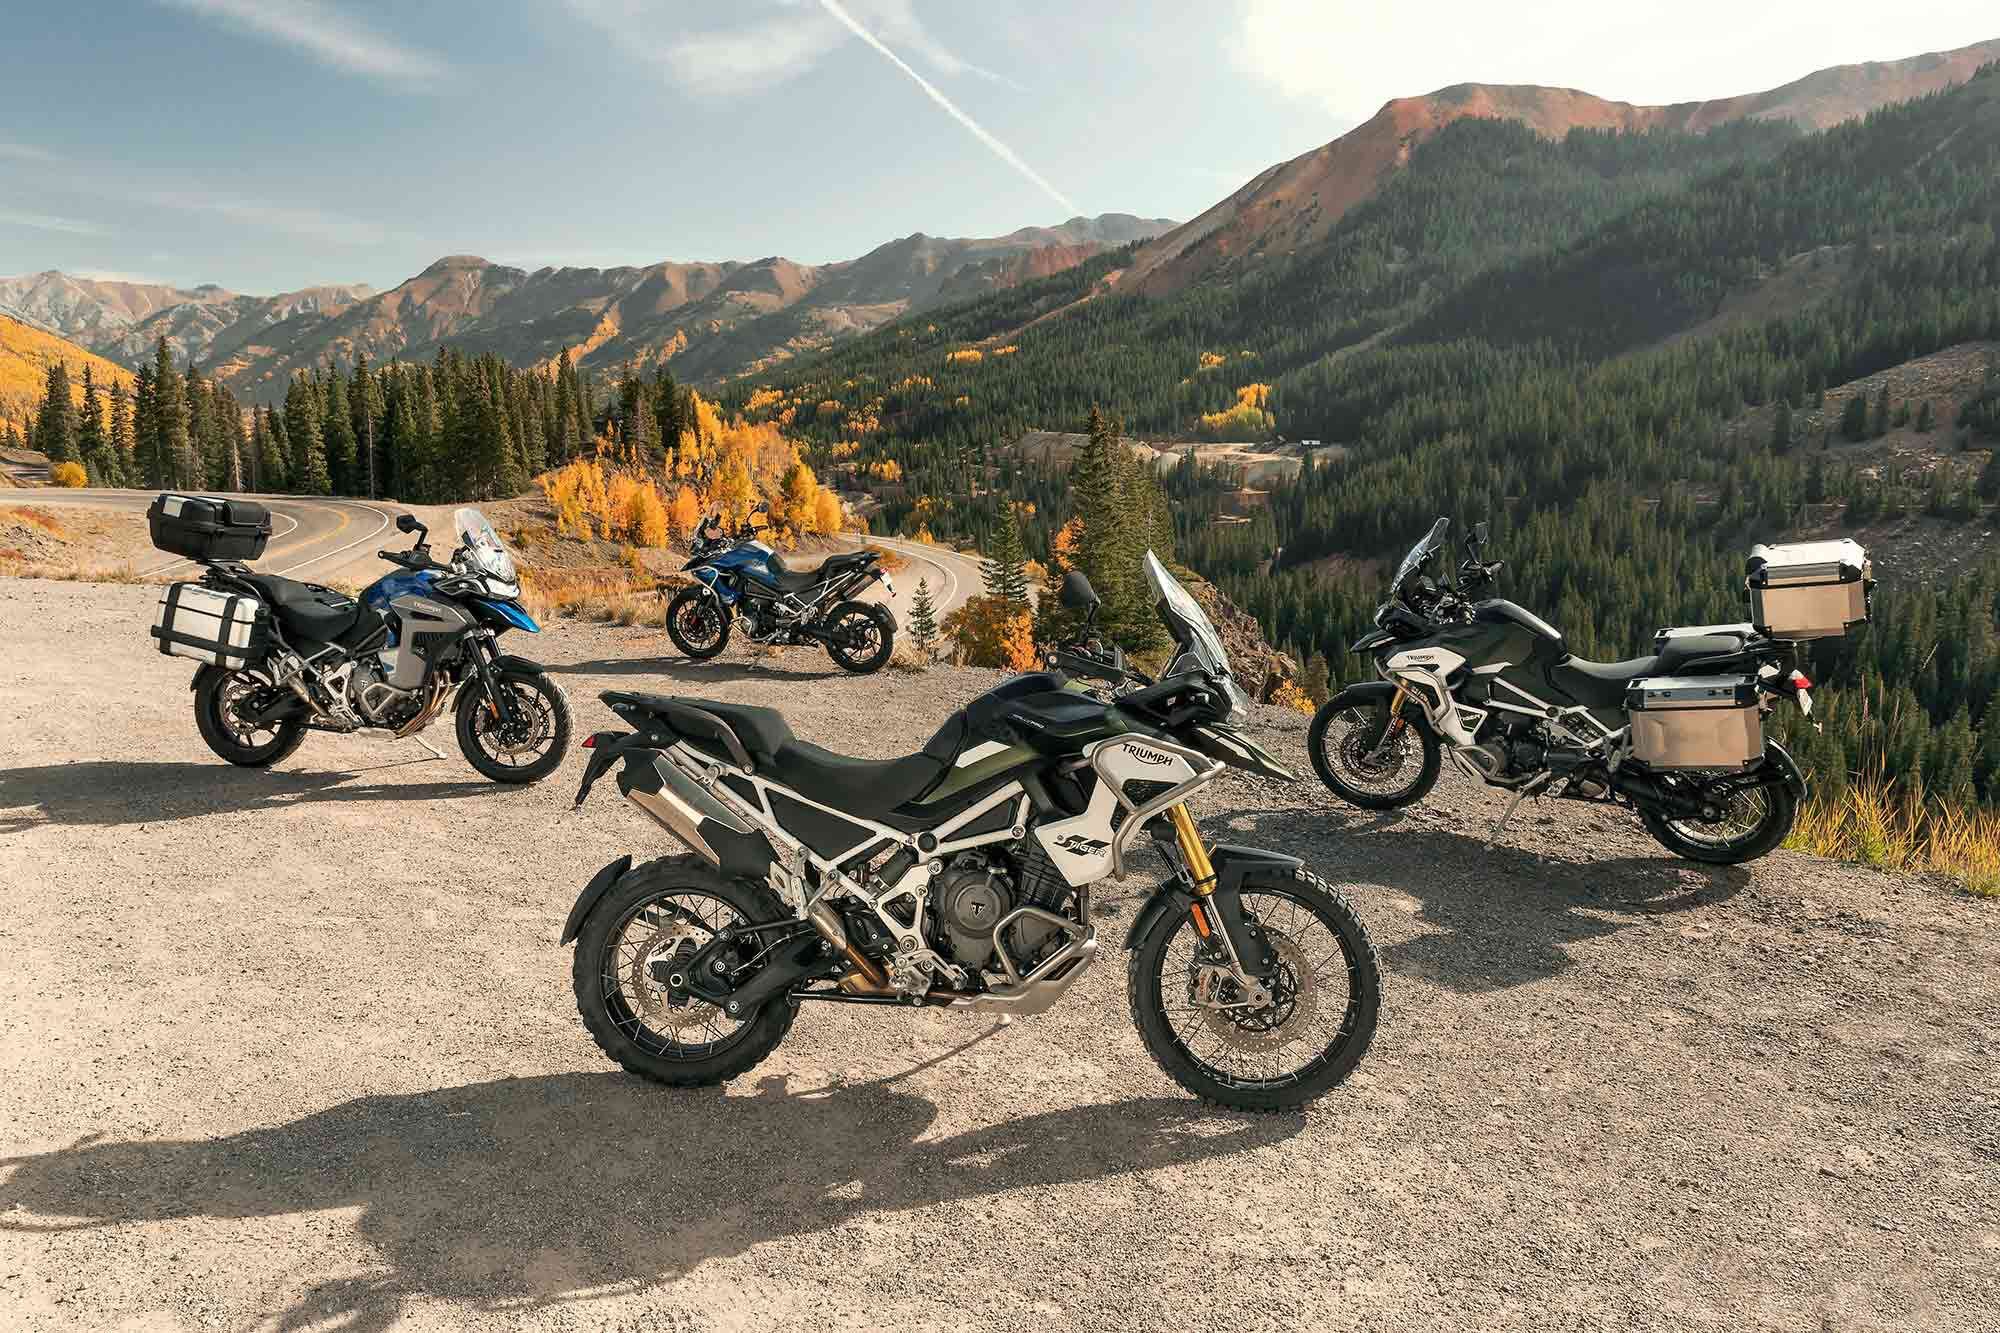 2022 Tiger 1200 Family: A Tiger 1200 for every occasion